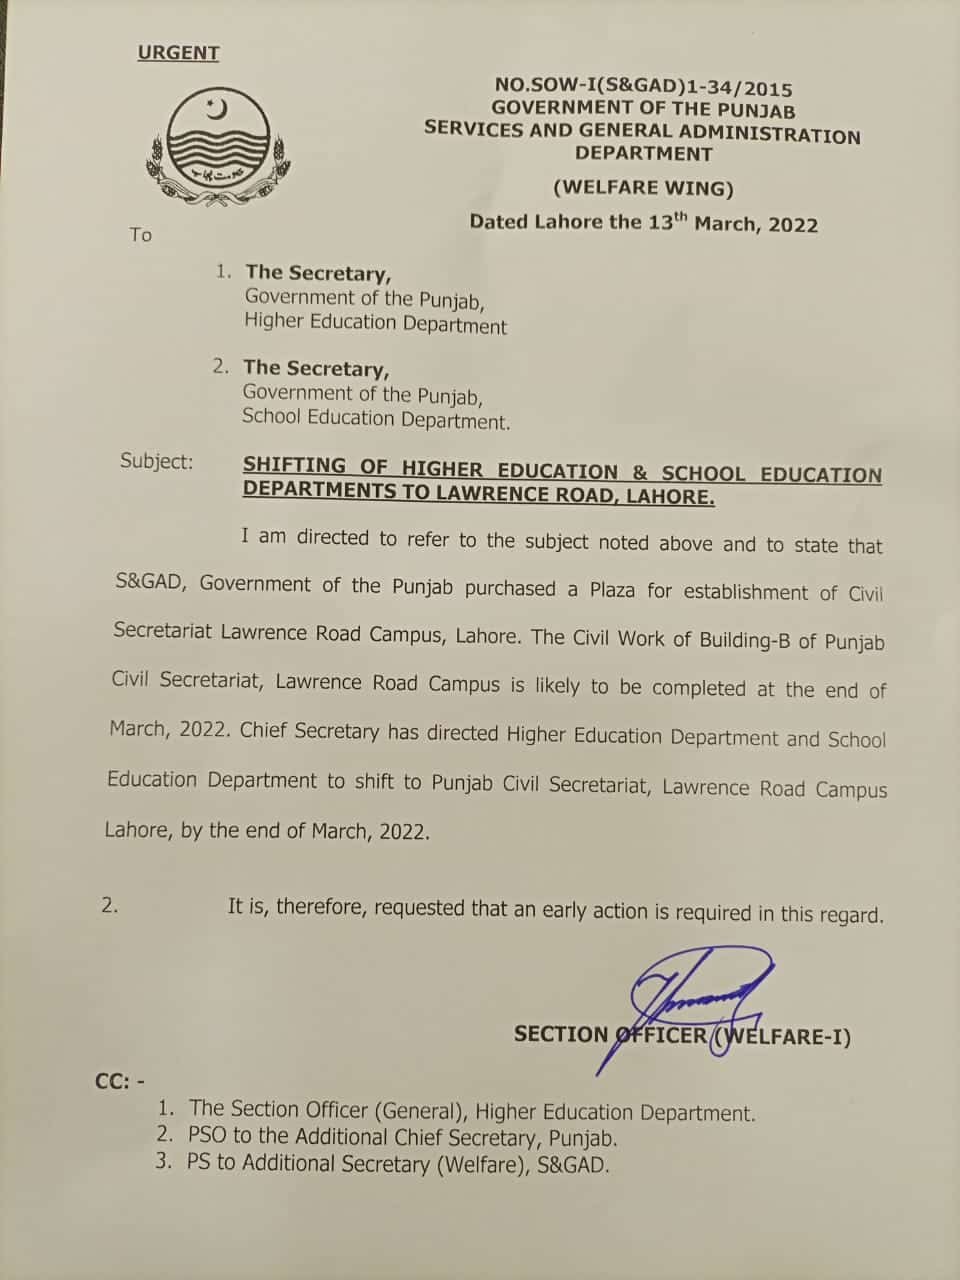 SHIFTING OF HIGHER EDUCATION & SCHOOL EDUCATION DEPARTMENTS TO LAWRENCE ROAD, LAHORE￼